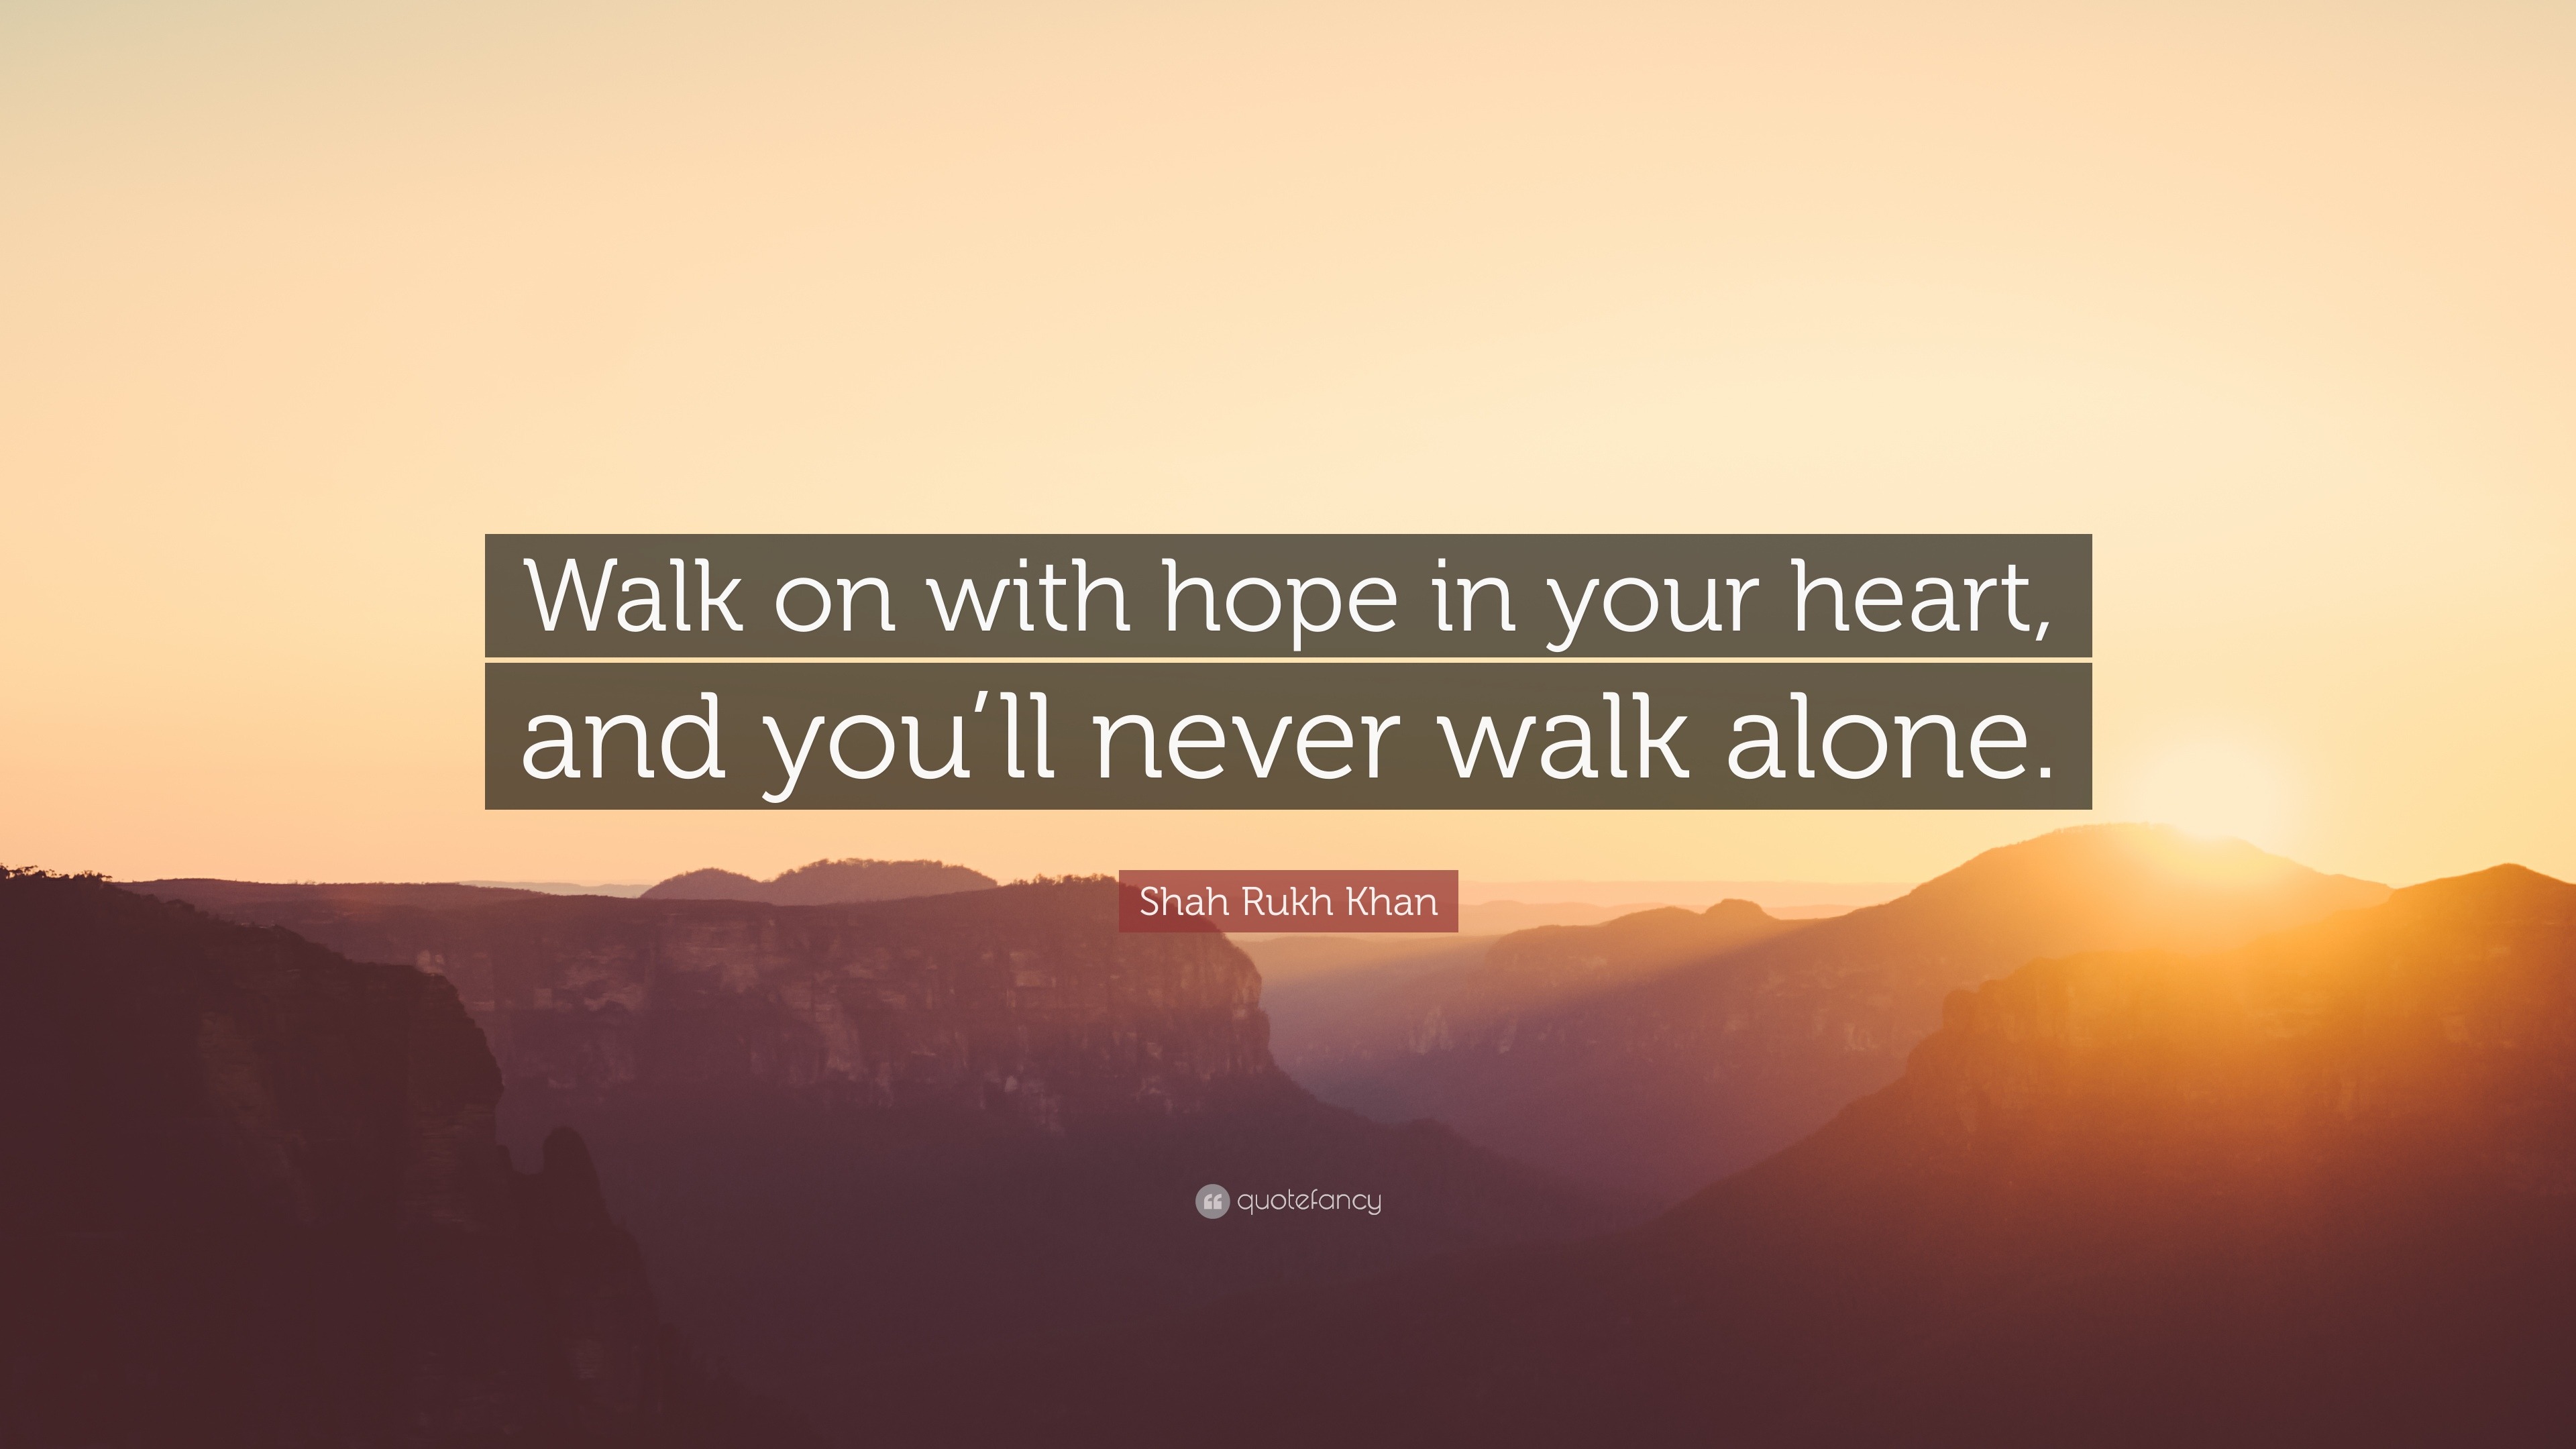 Shah Rukh Khan Quote Walk On With Hope In Your Heart And You Ll Never Walk